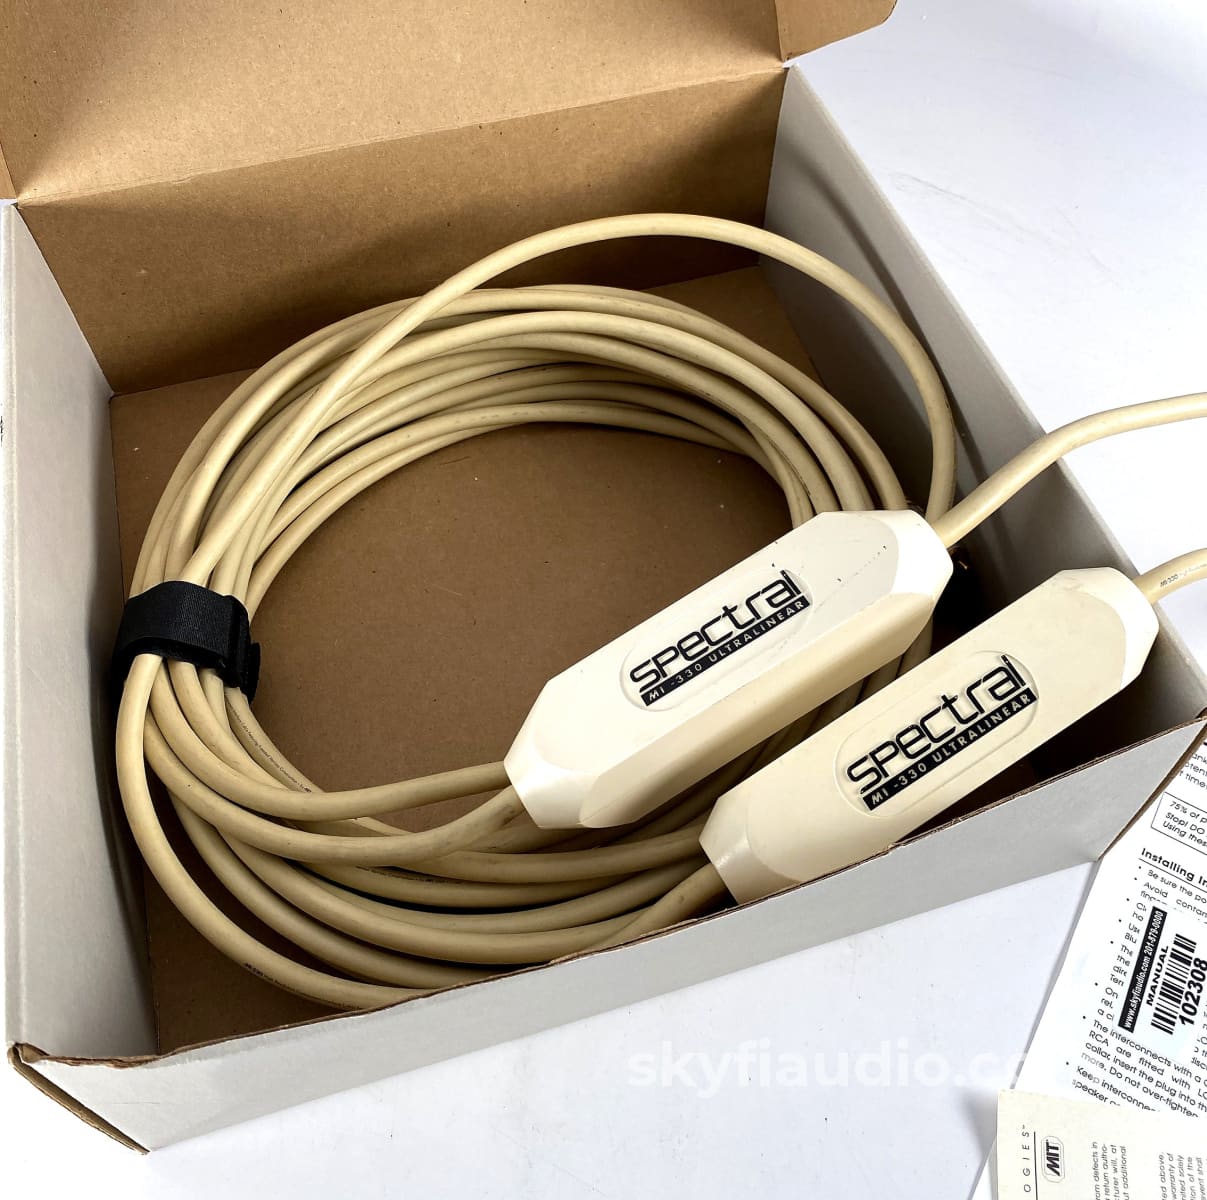 Spectral Mi-330 Ultralinear Rca Interface Cables W/Mit Terminator Technology - 25 Feet Long!